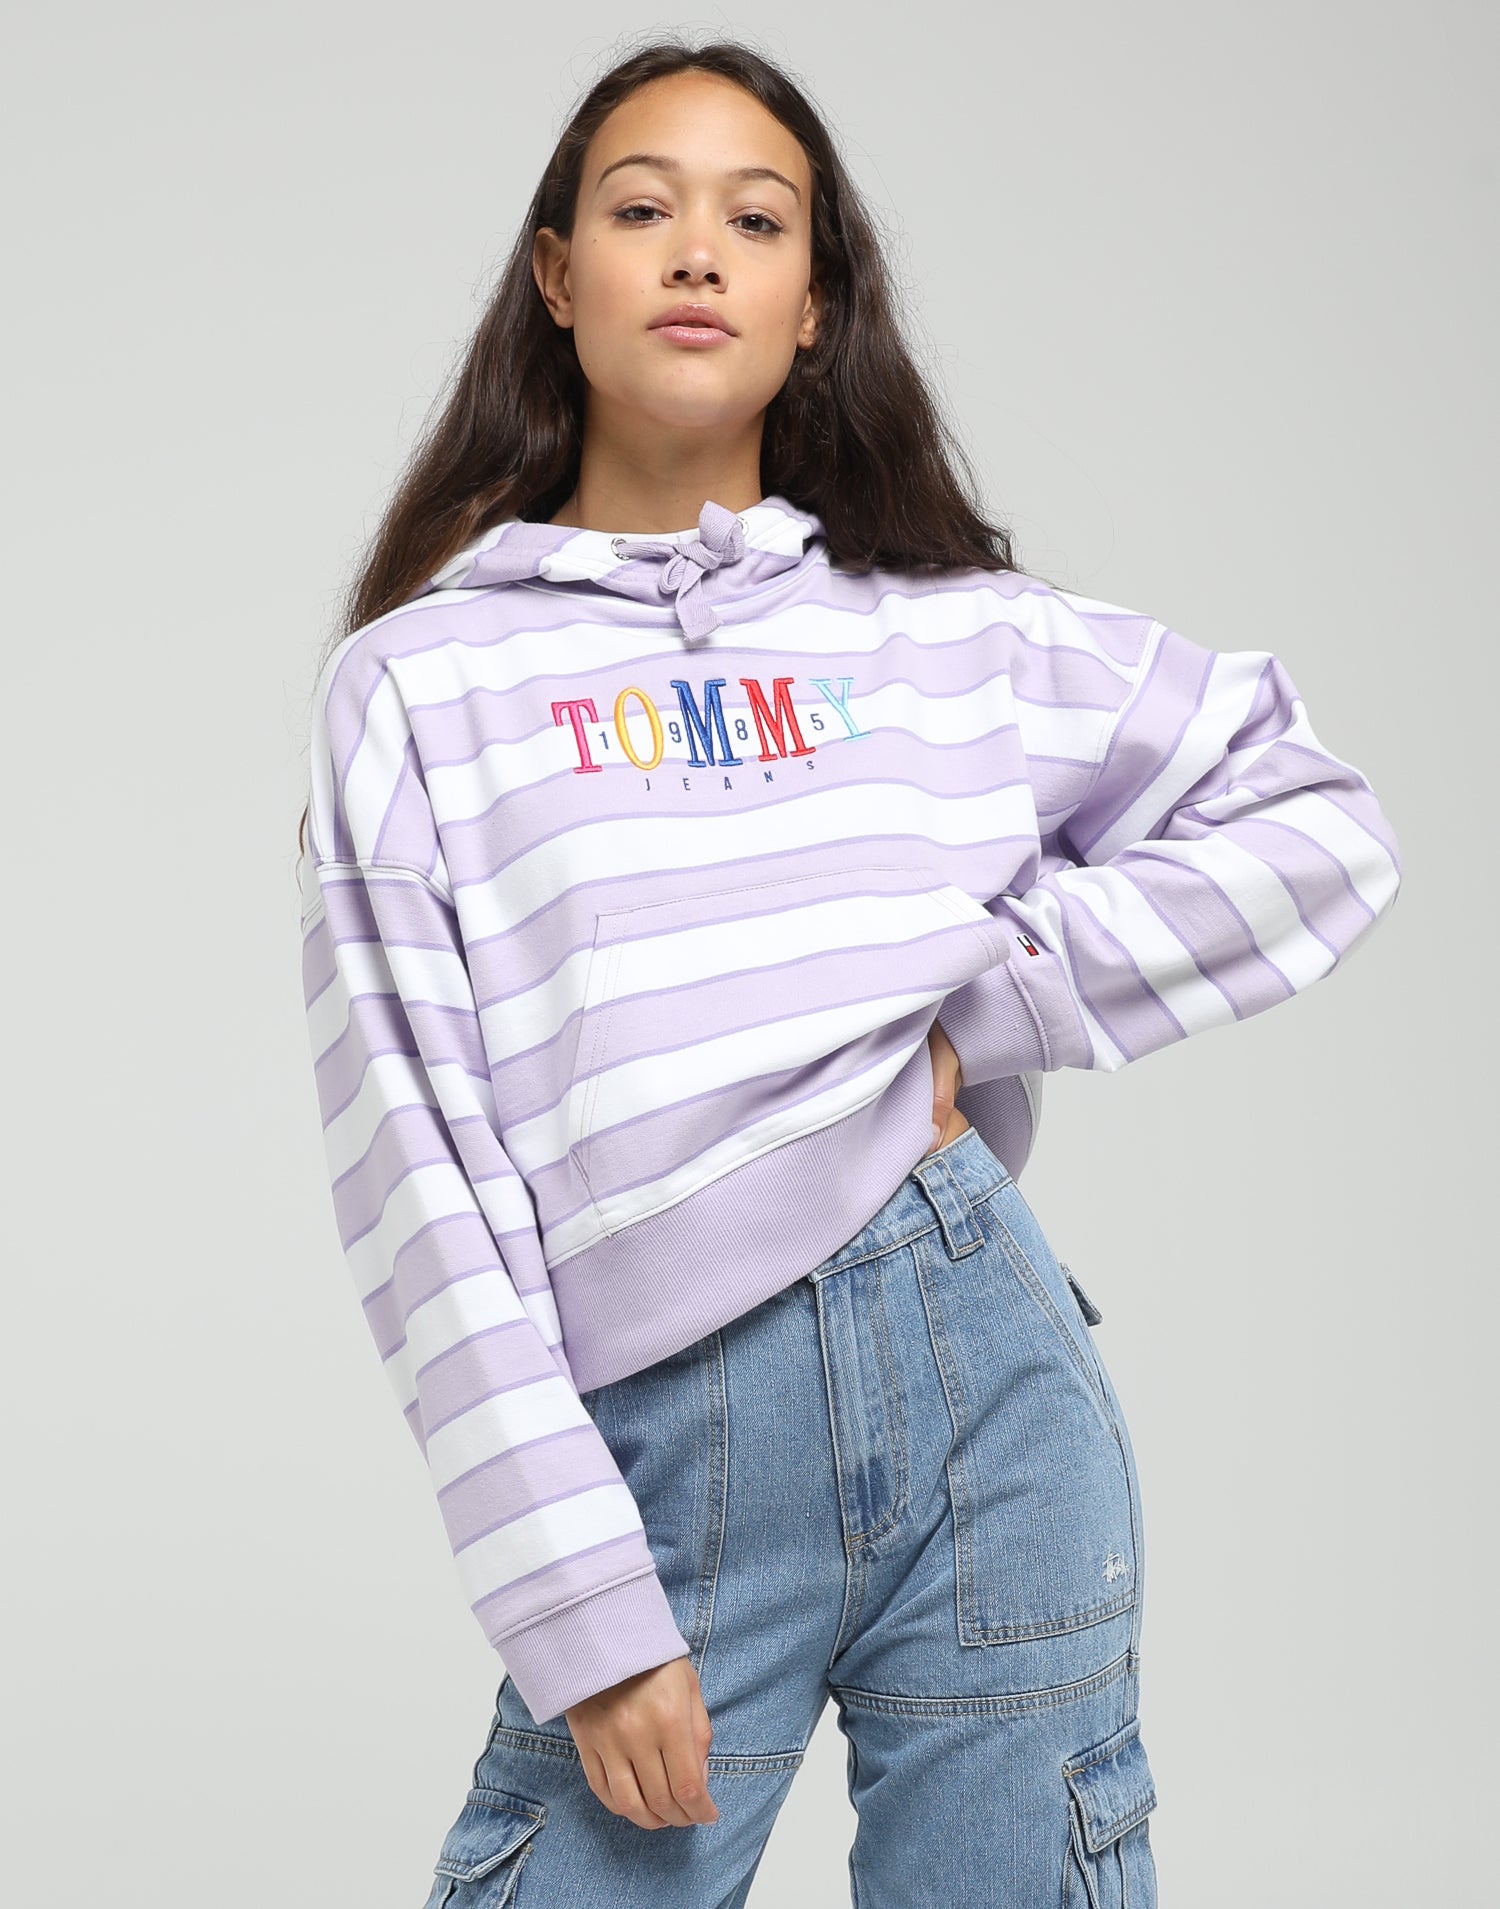 tommy jeans culture kings